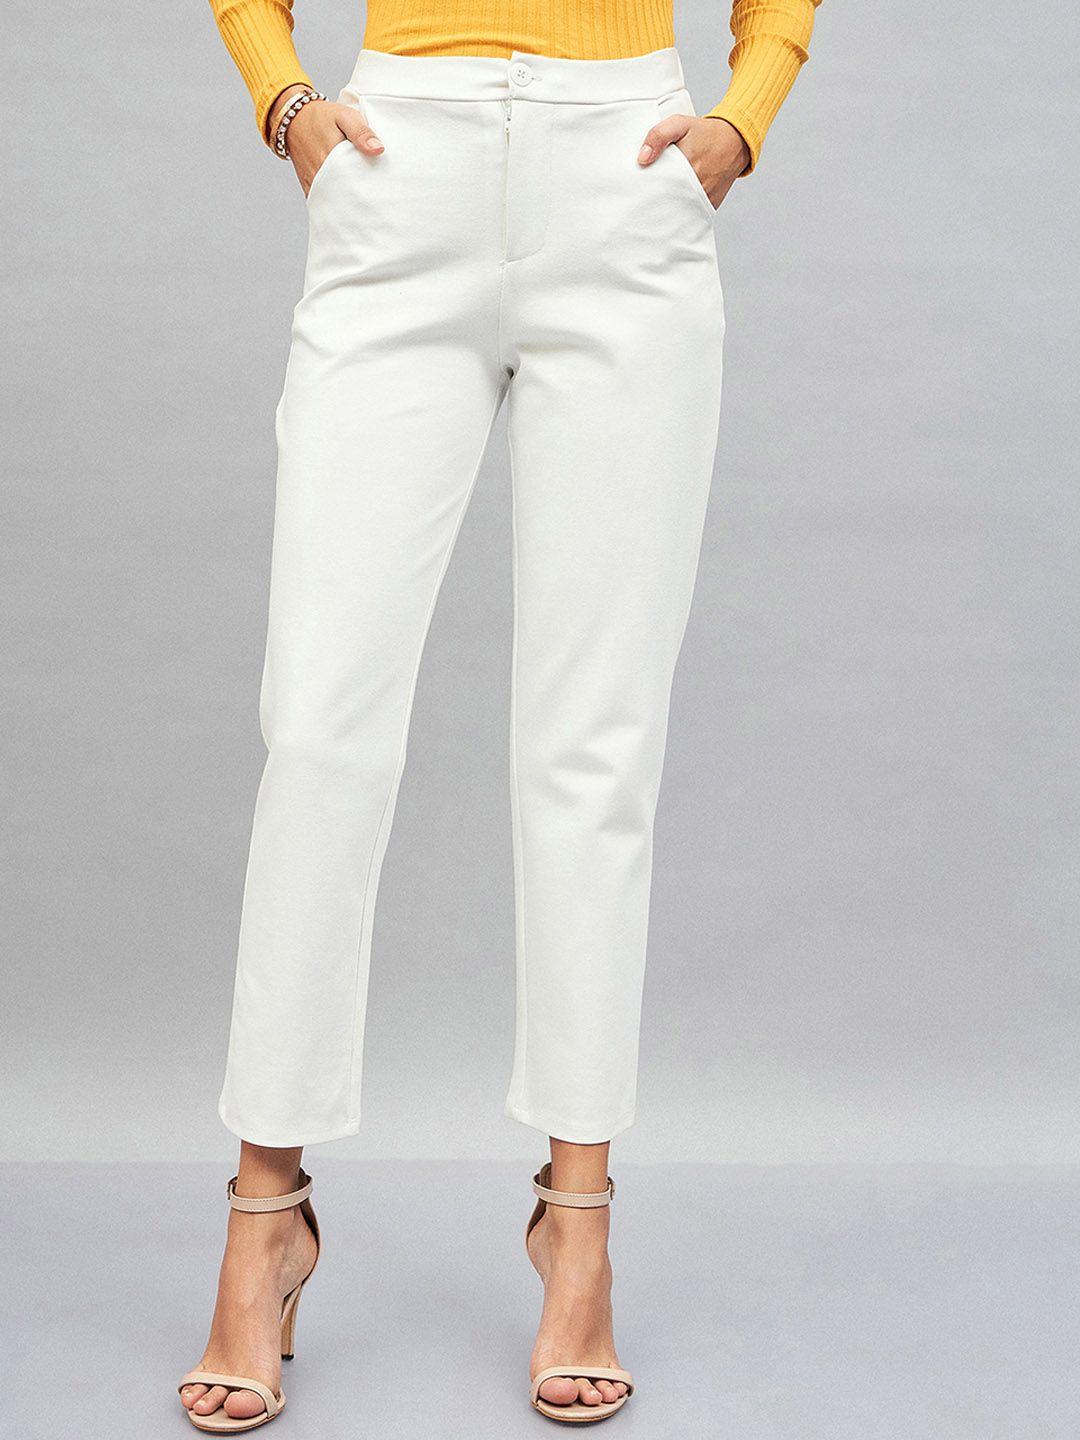 sassafras-women-mid-rise-tapered-fit-trousers